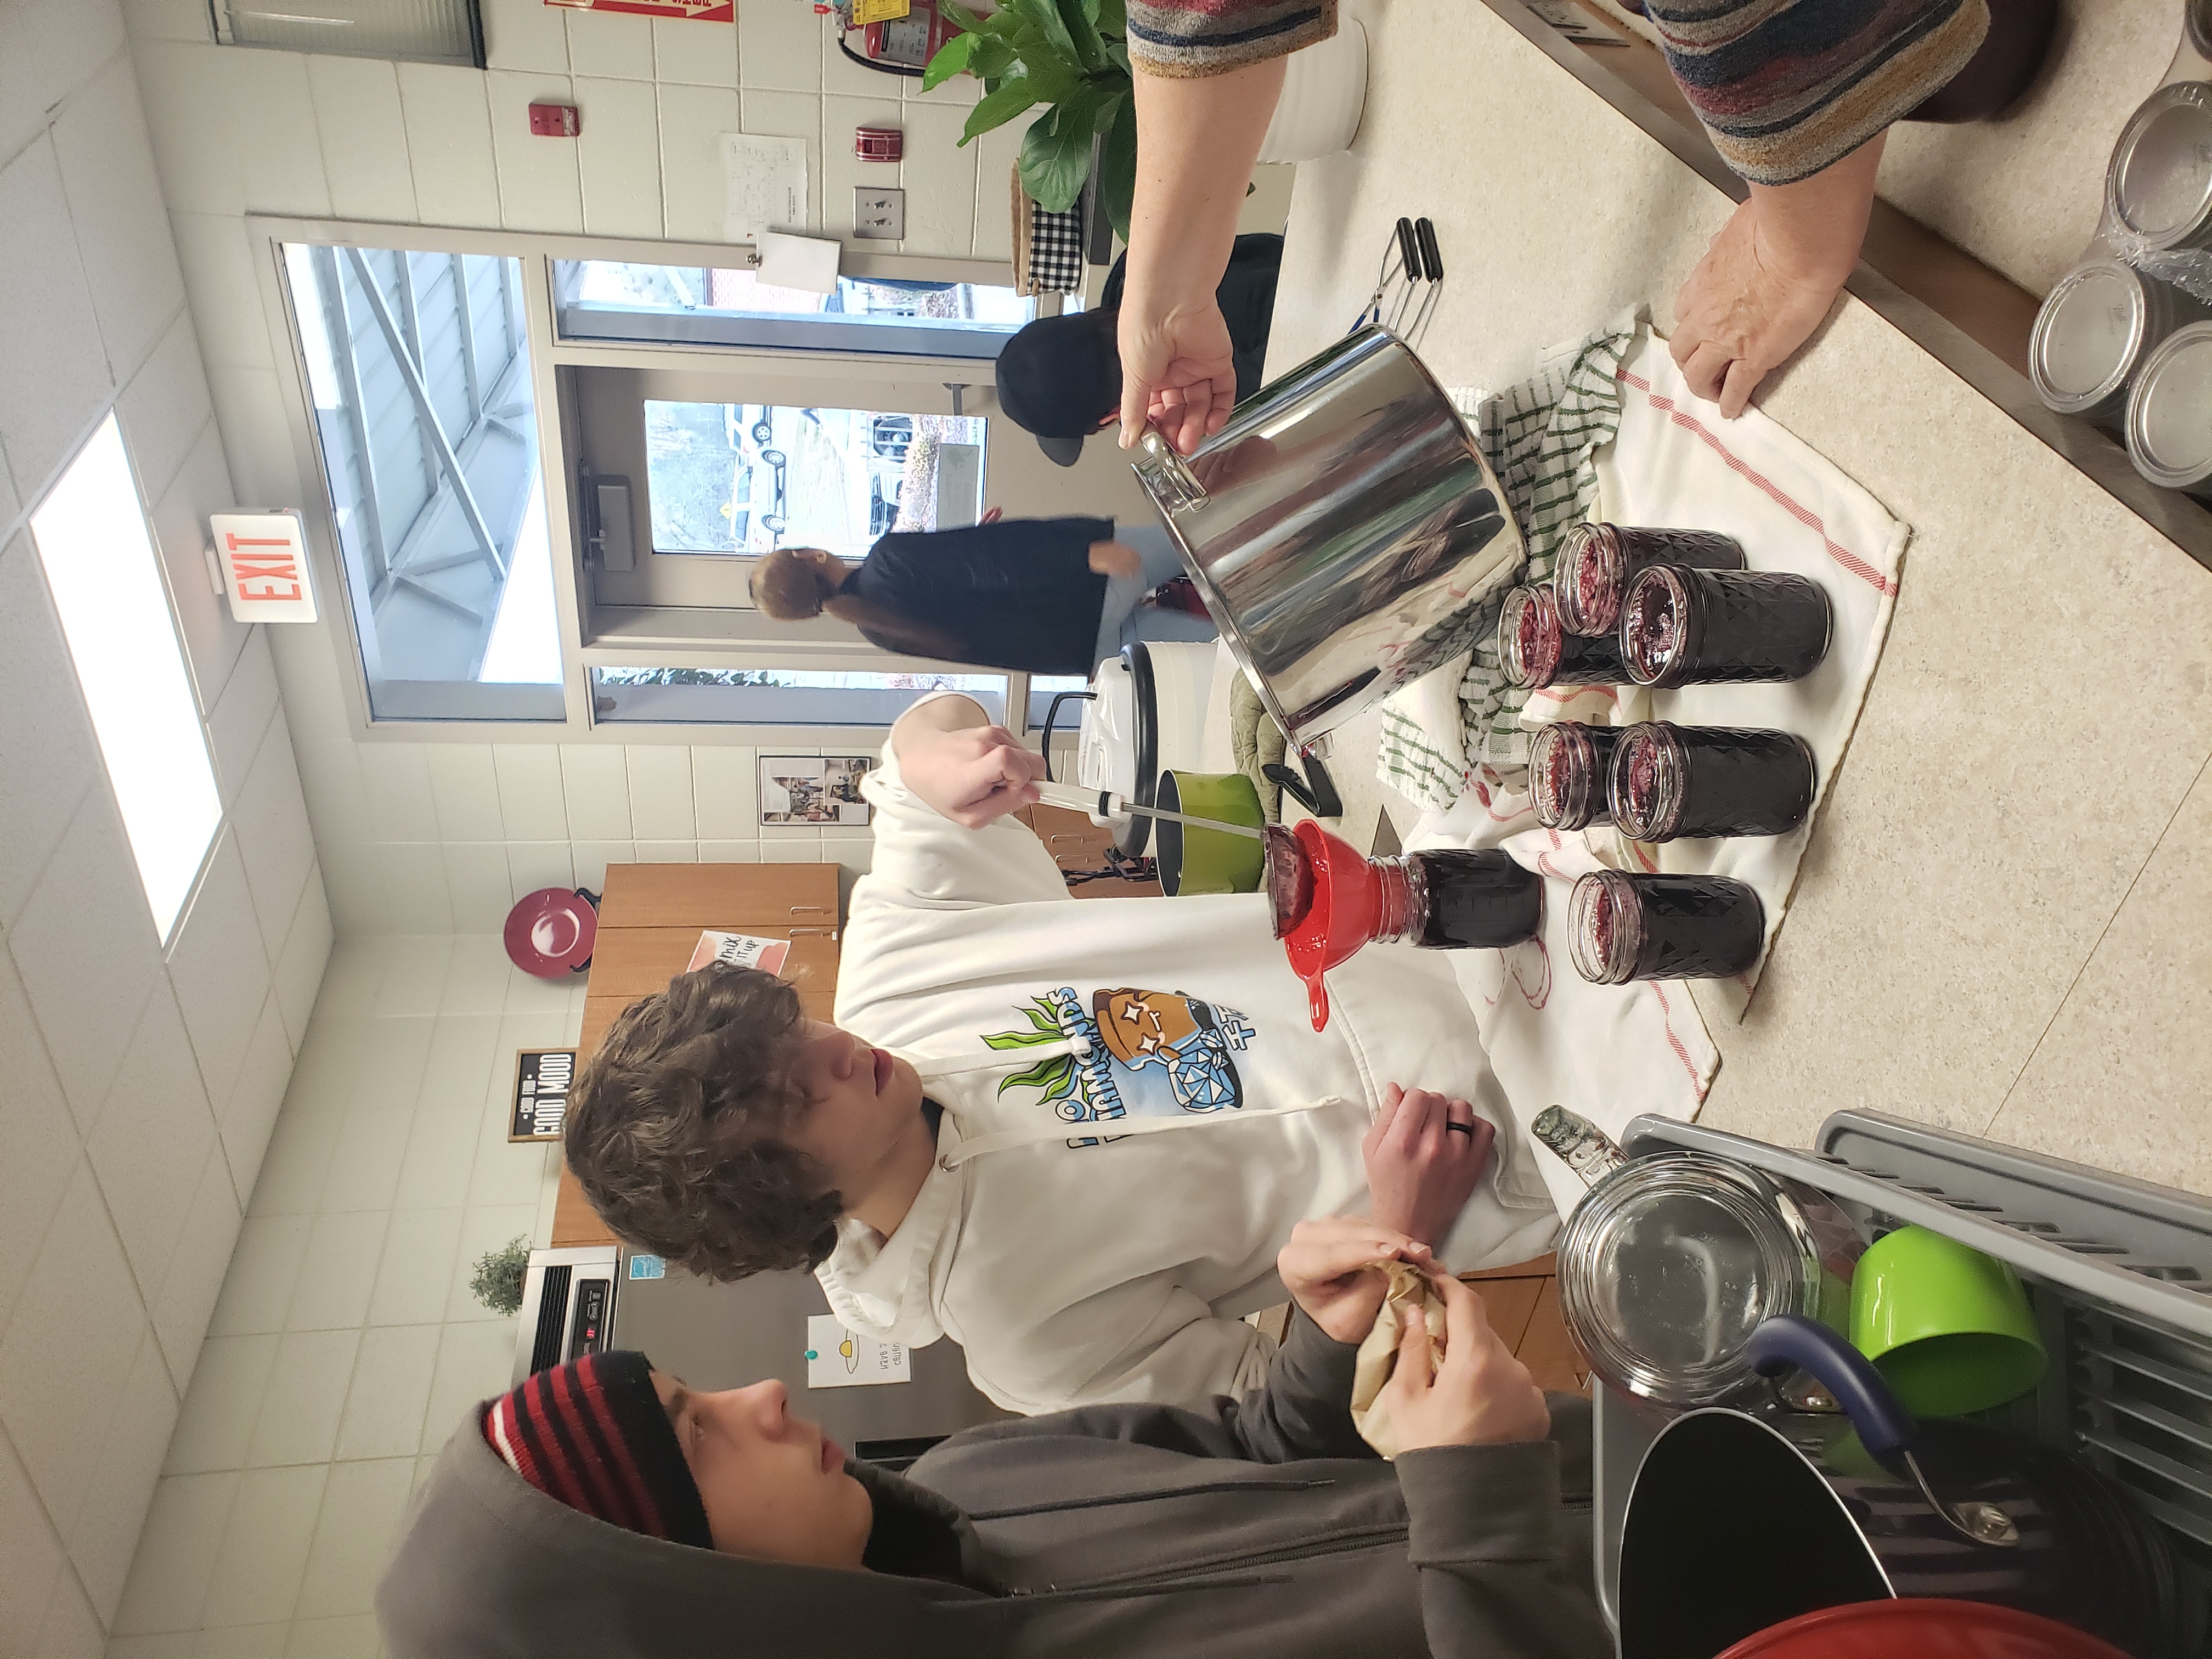 HHS Students learning proper canning techniques